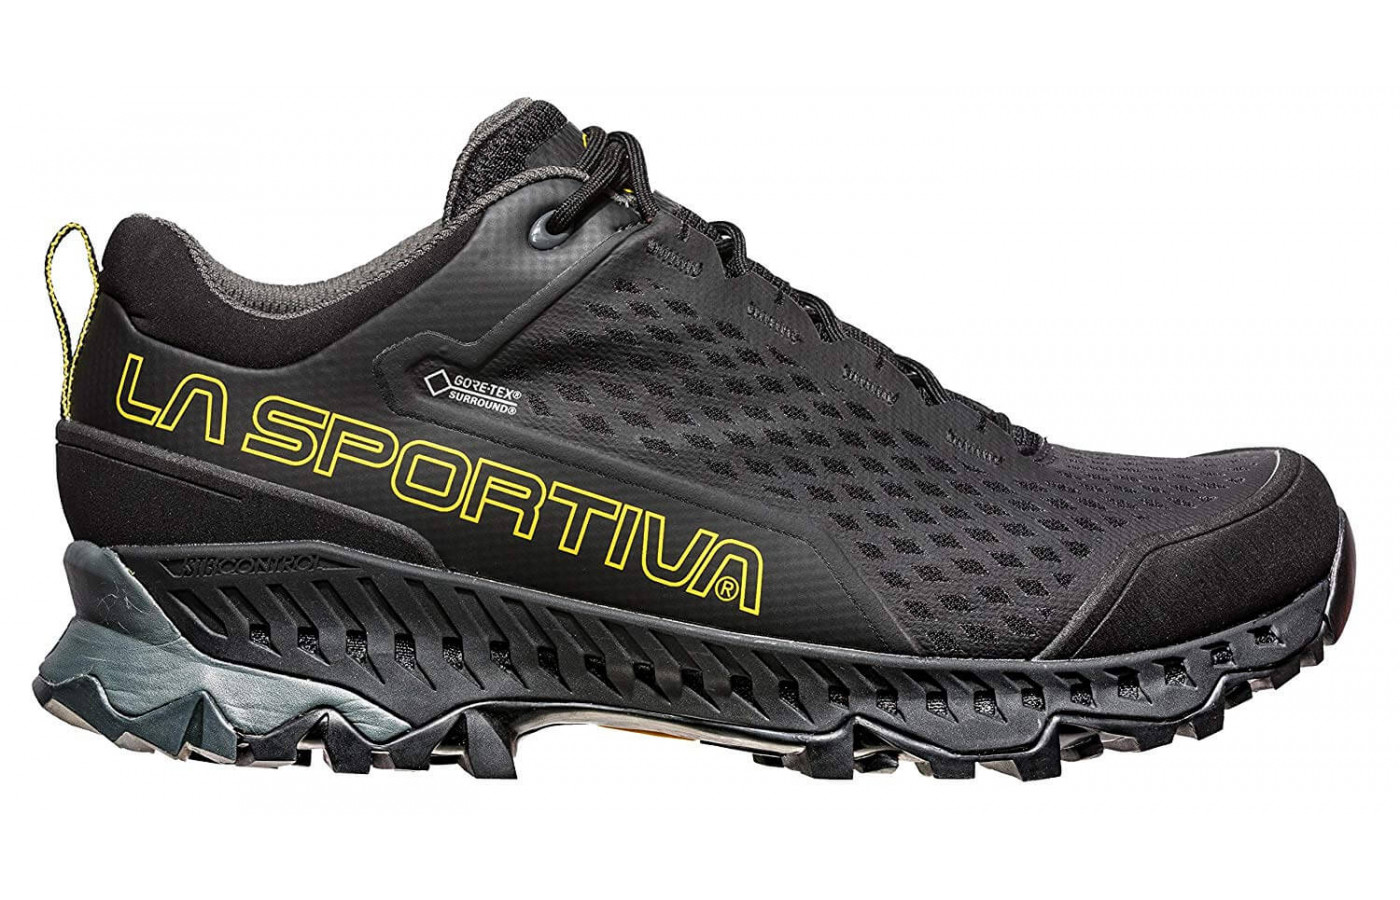 The Spire GTX's midsole is made with compression-molded EVA